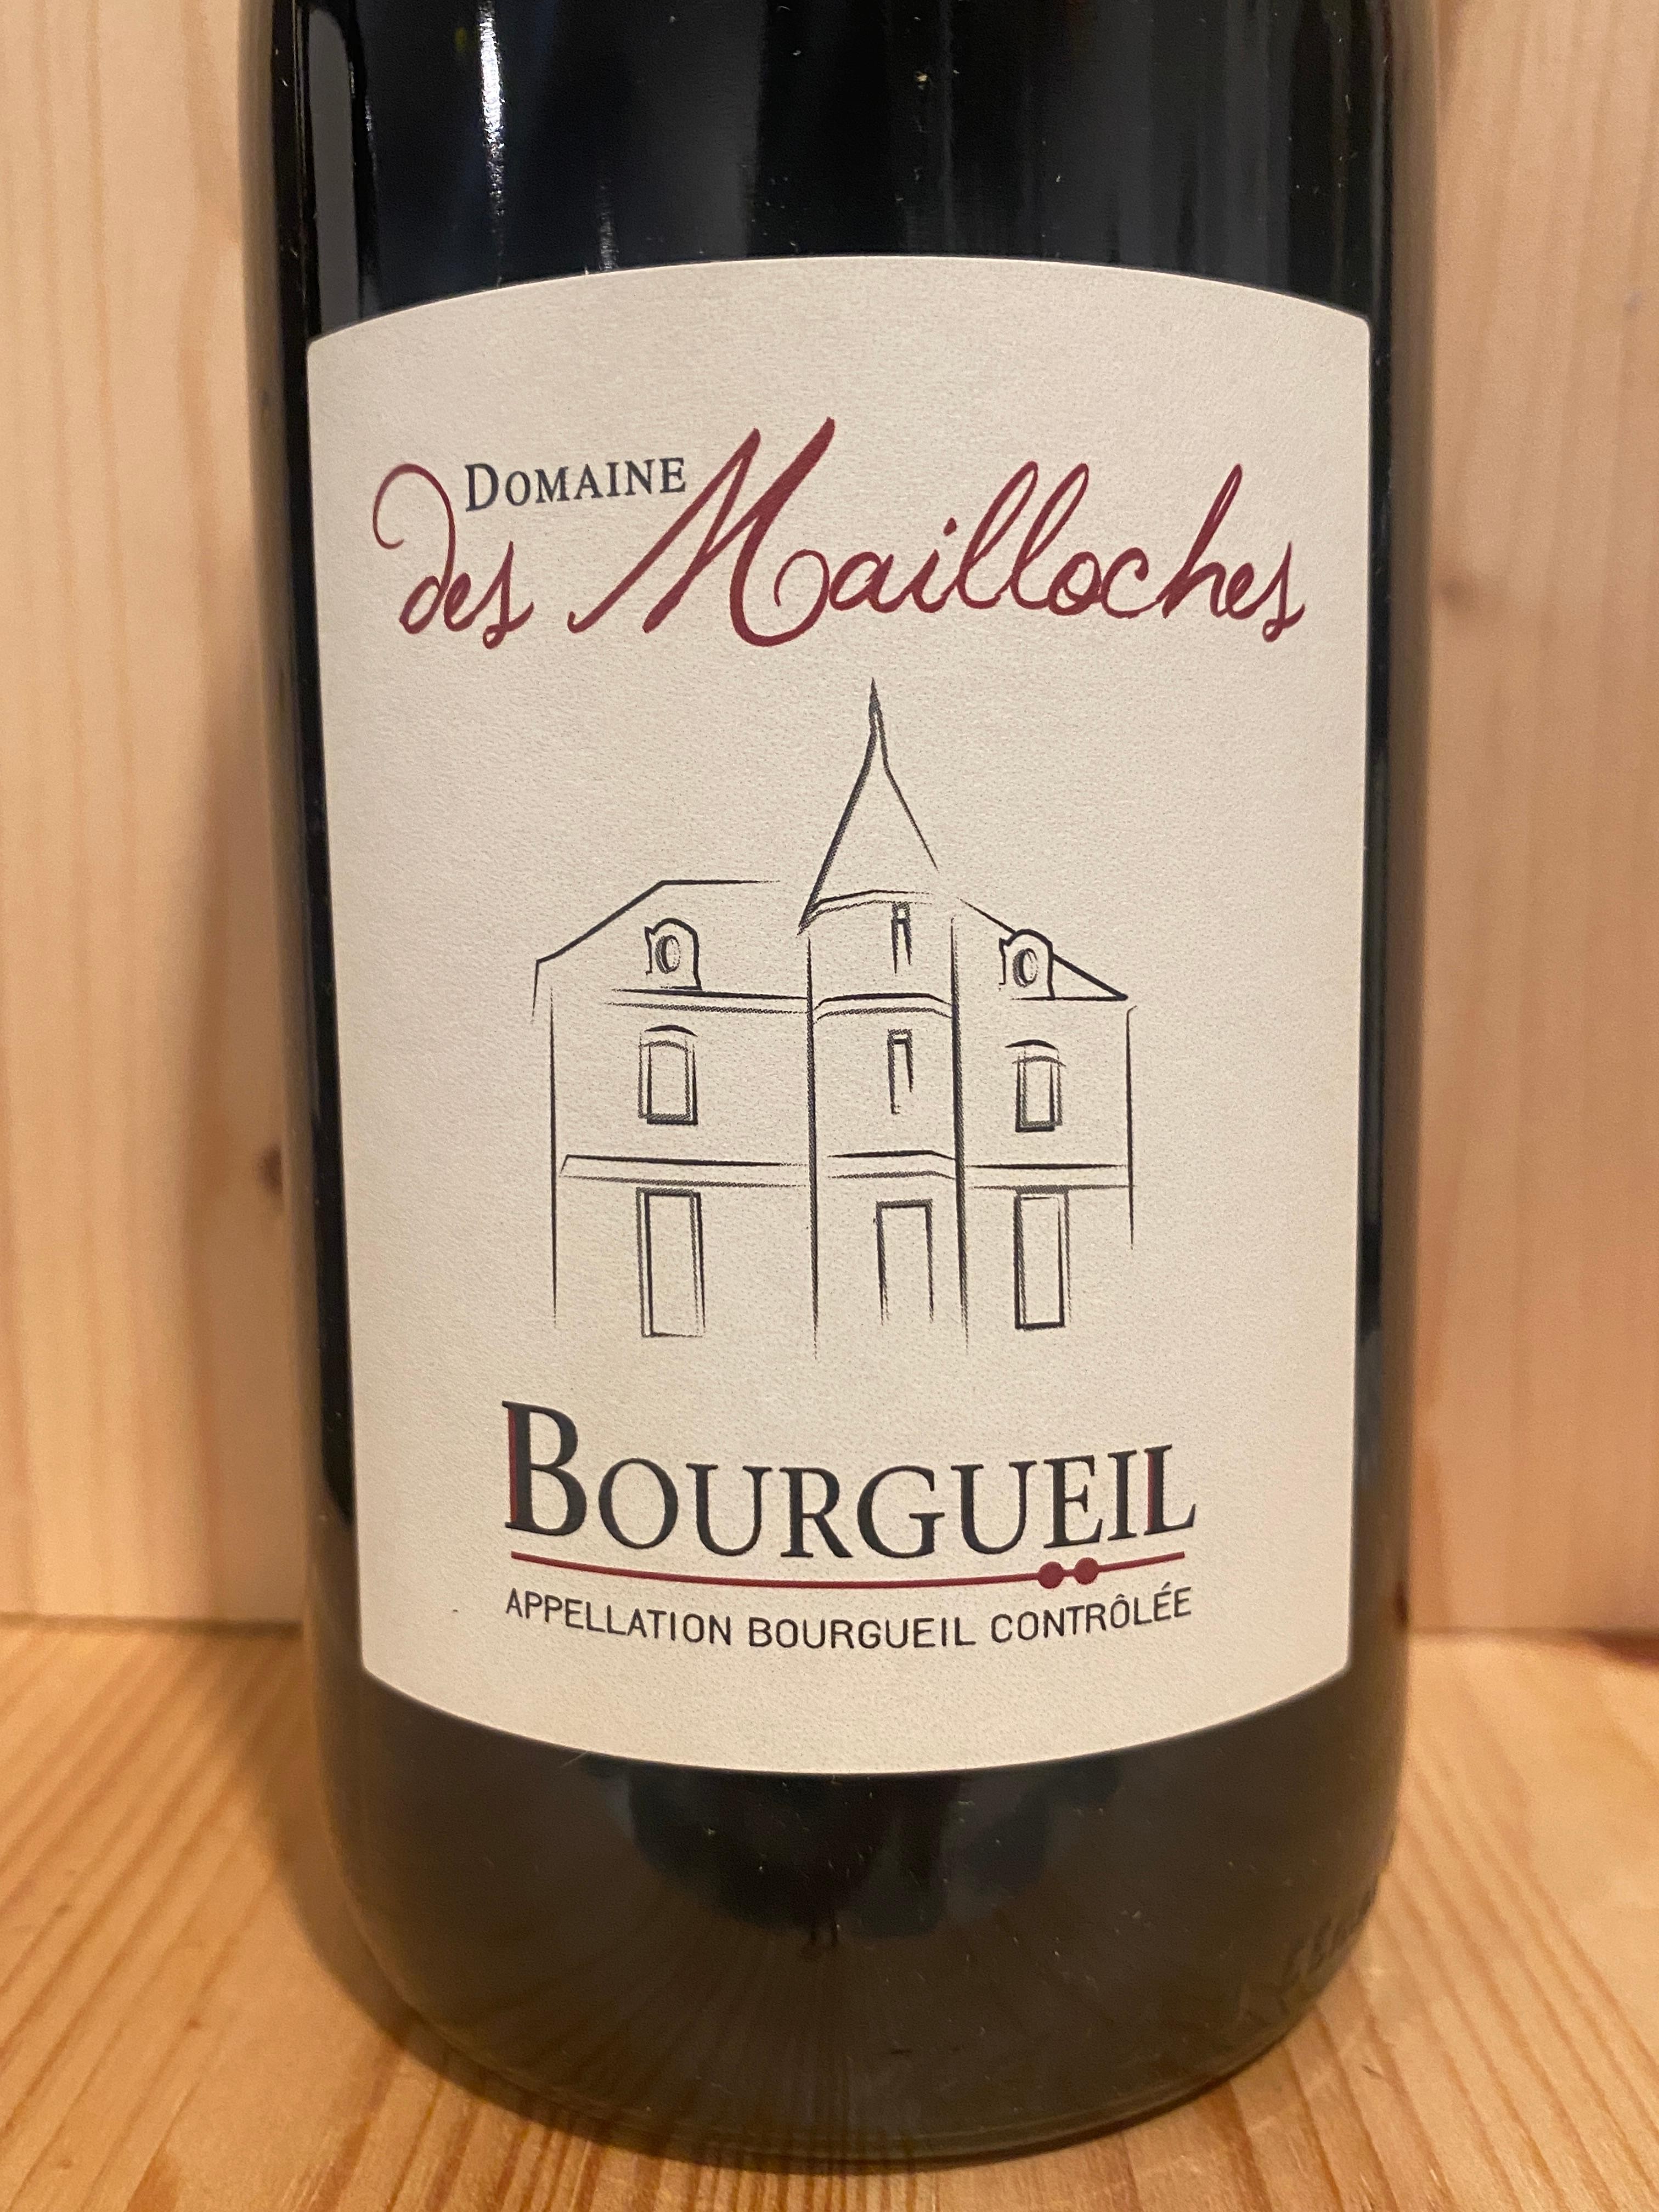 Dom. des Mailloches Bourgueil 2021: Loire Valley, France